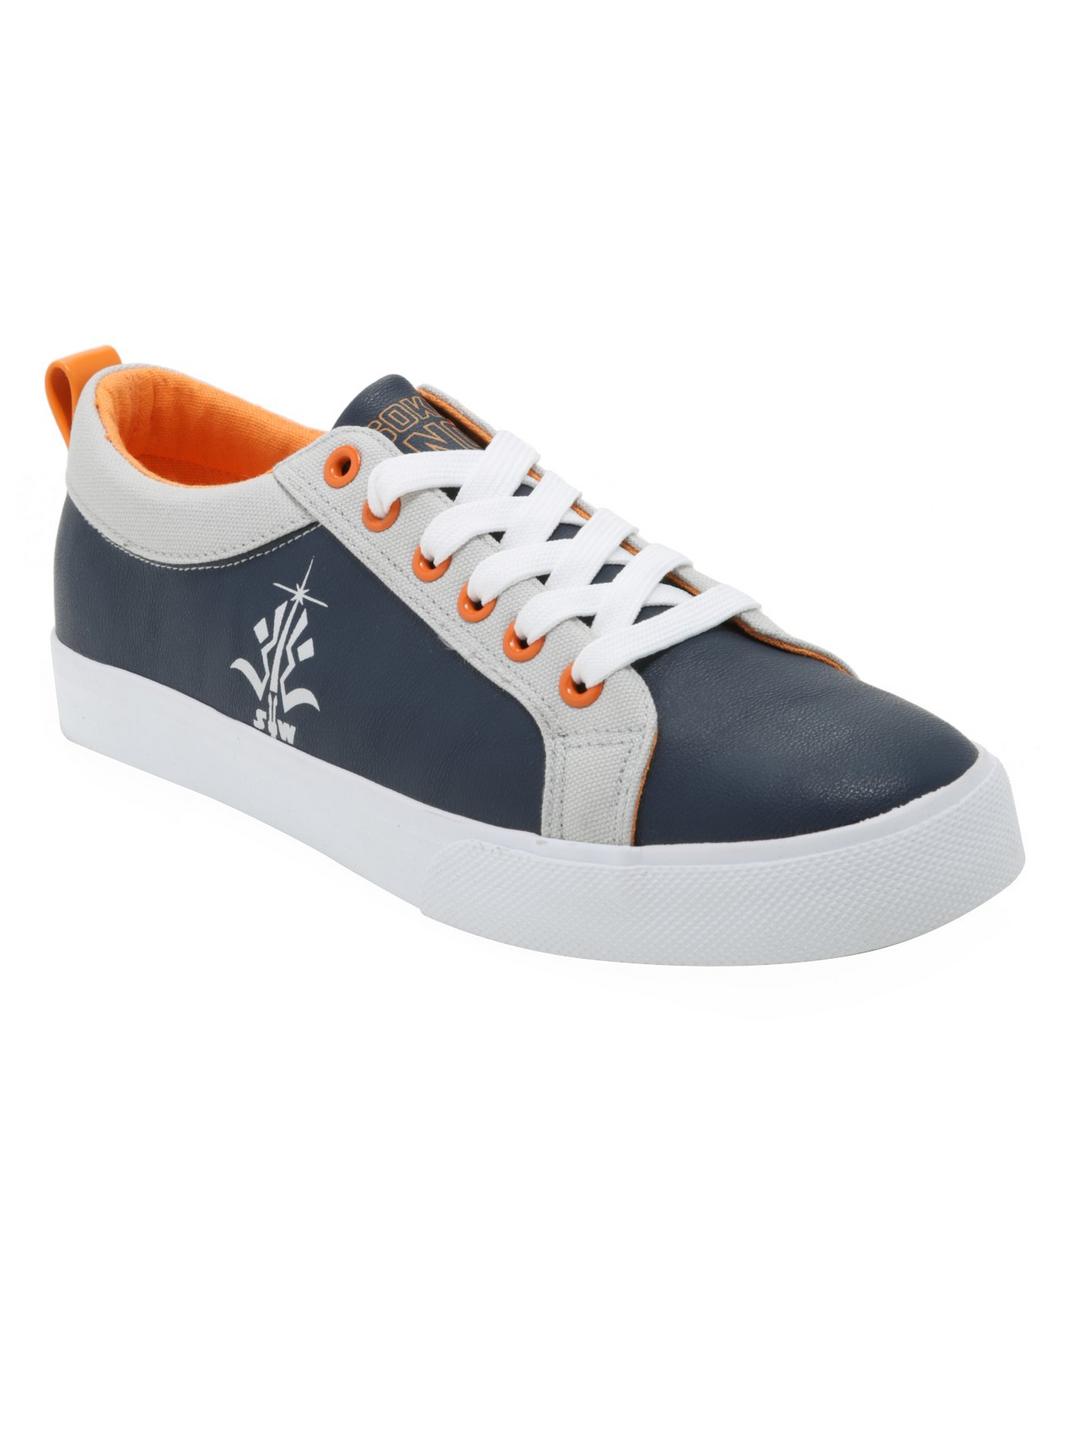 Her Universe Star Wars Ahsoka Tano Lace-Up Sneakers, MULTI, hi-res